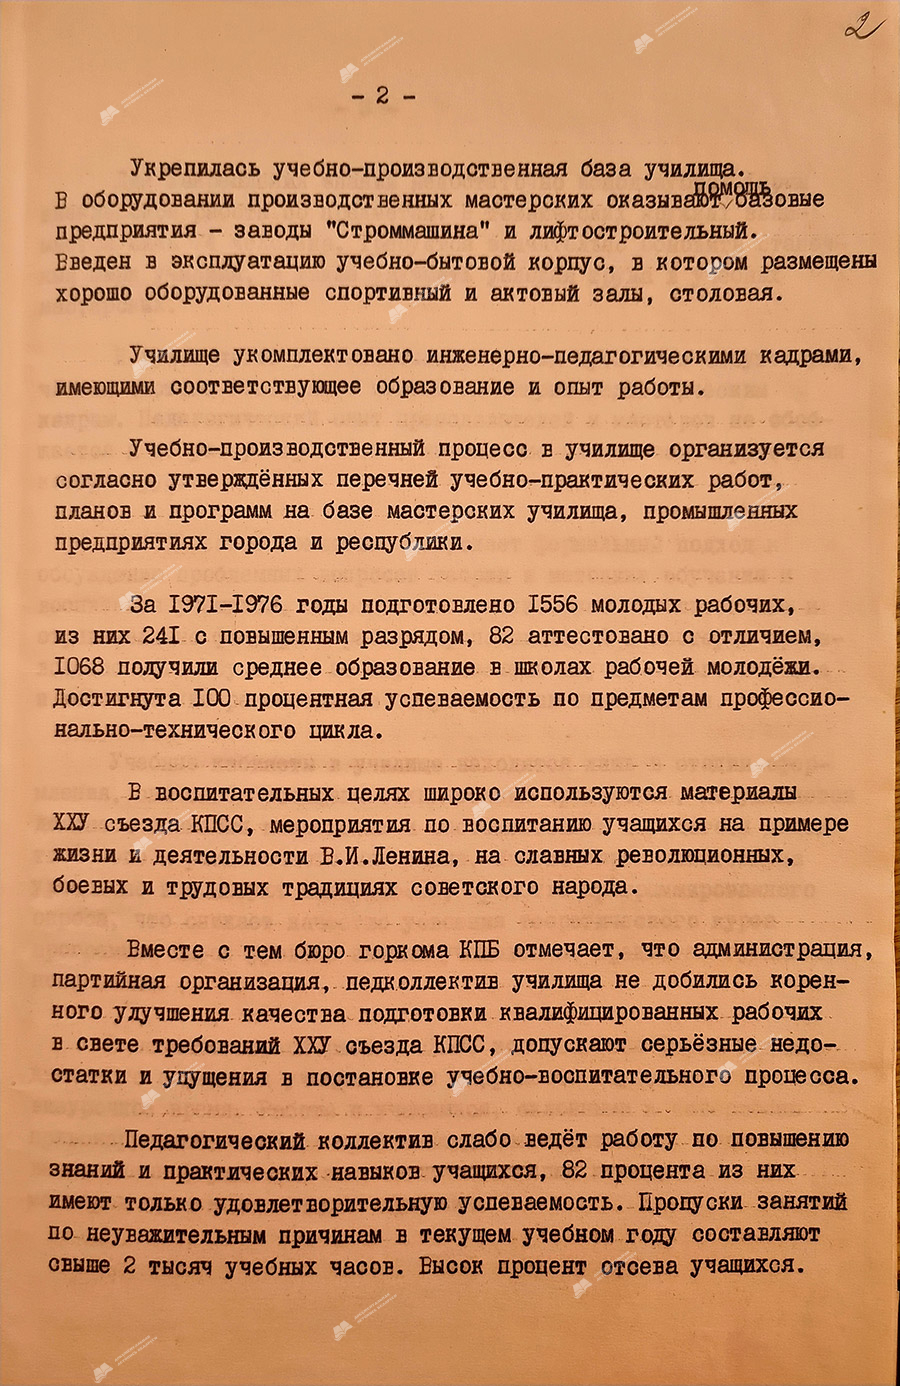 From the protocol No. 19 of the meeting of the bureau of the Mogilev city committee of the Communist Party of Belarus «On the work of the party organization and the administration of technical school No. 33 of metal workers to improve the quality of training and education of skilled workers for the national economy in the light of the requirements of the 25th Congress of the CPSU»-стр. 1